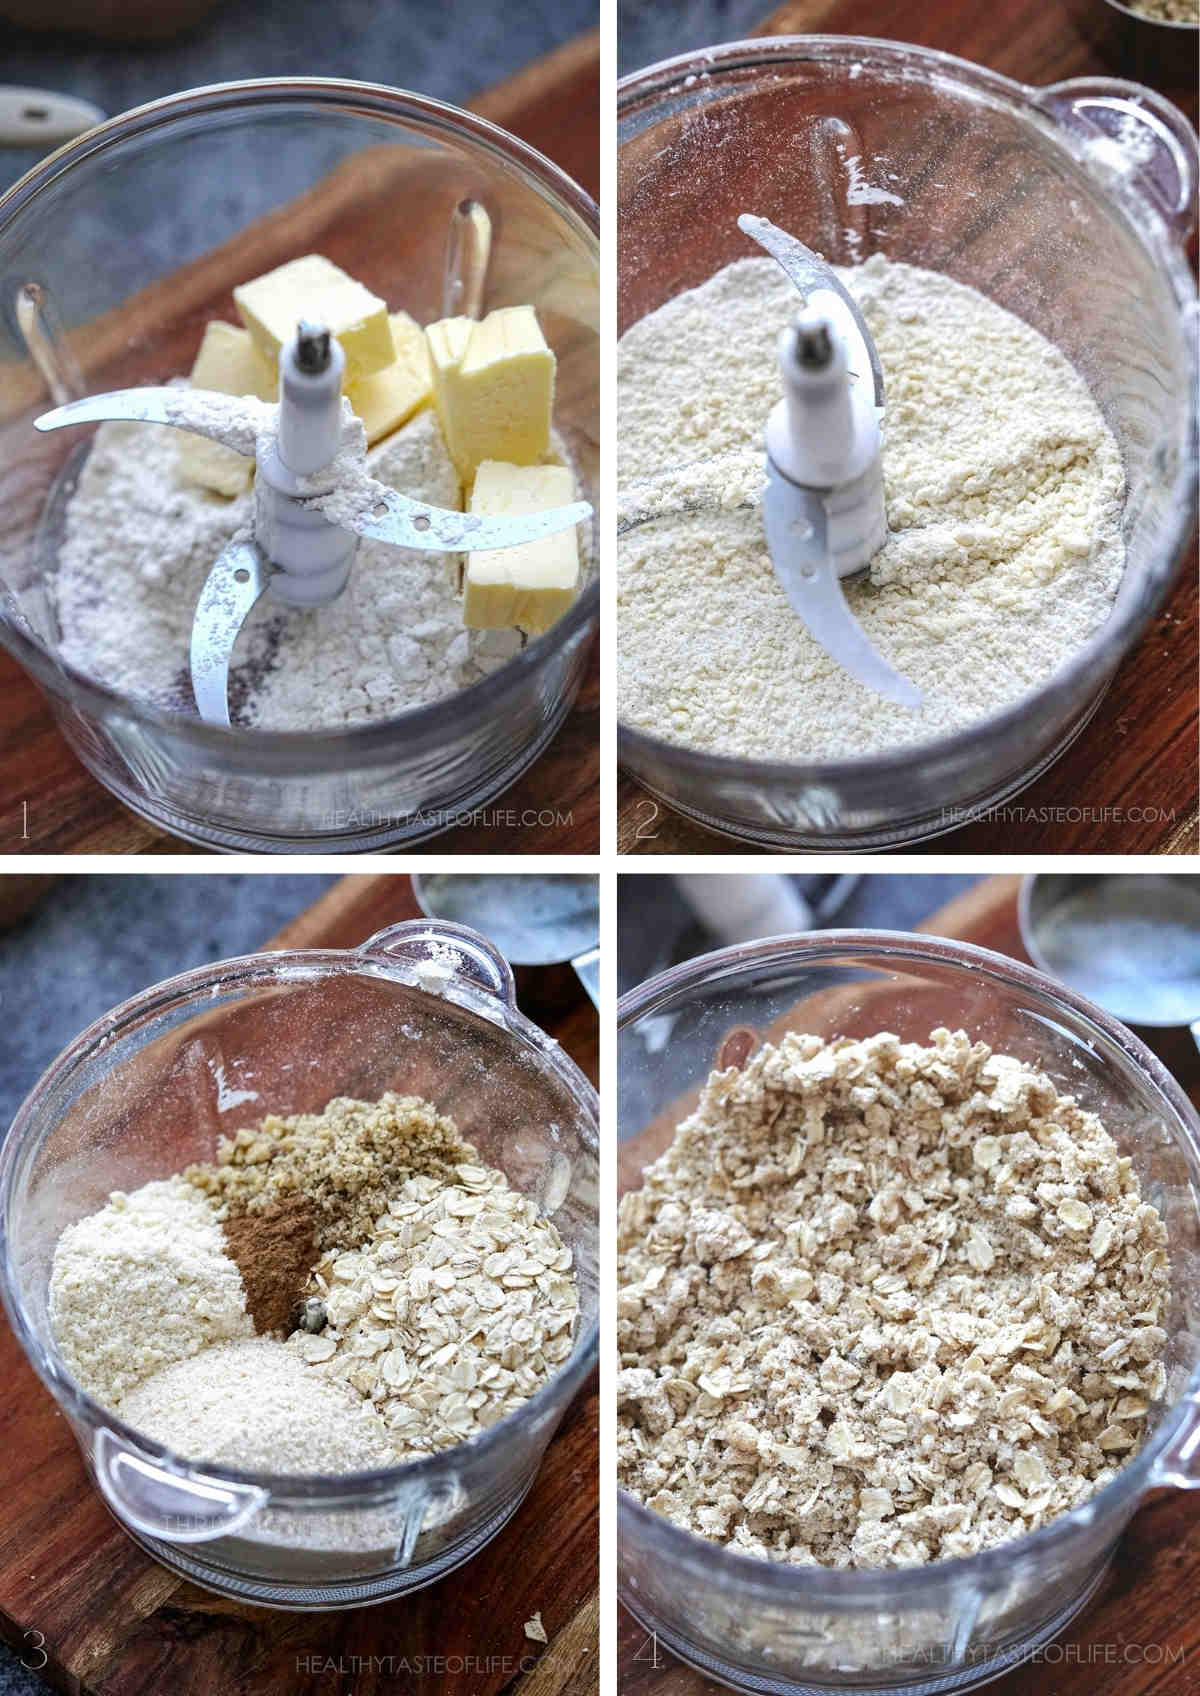 Process shots showing how to make oat crumble topping for strawberries.